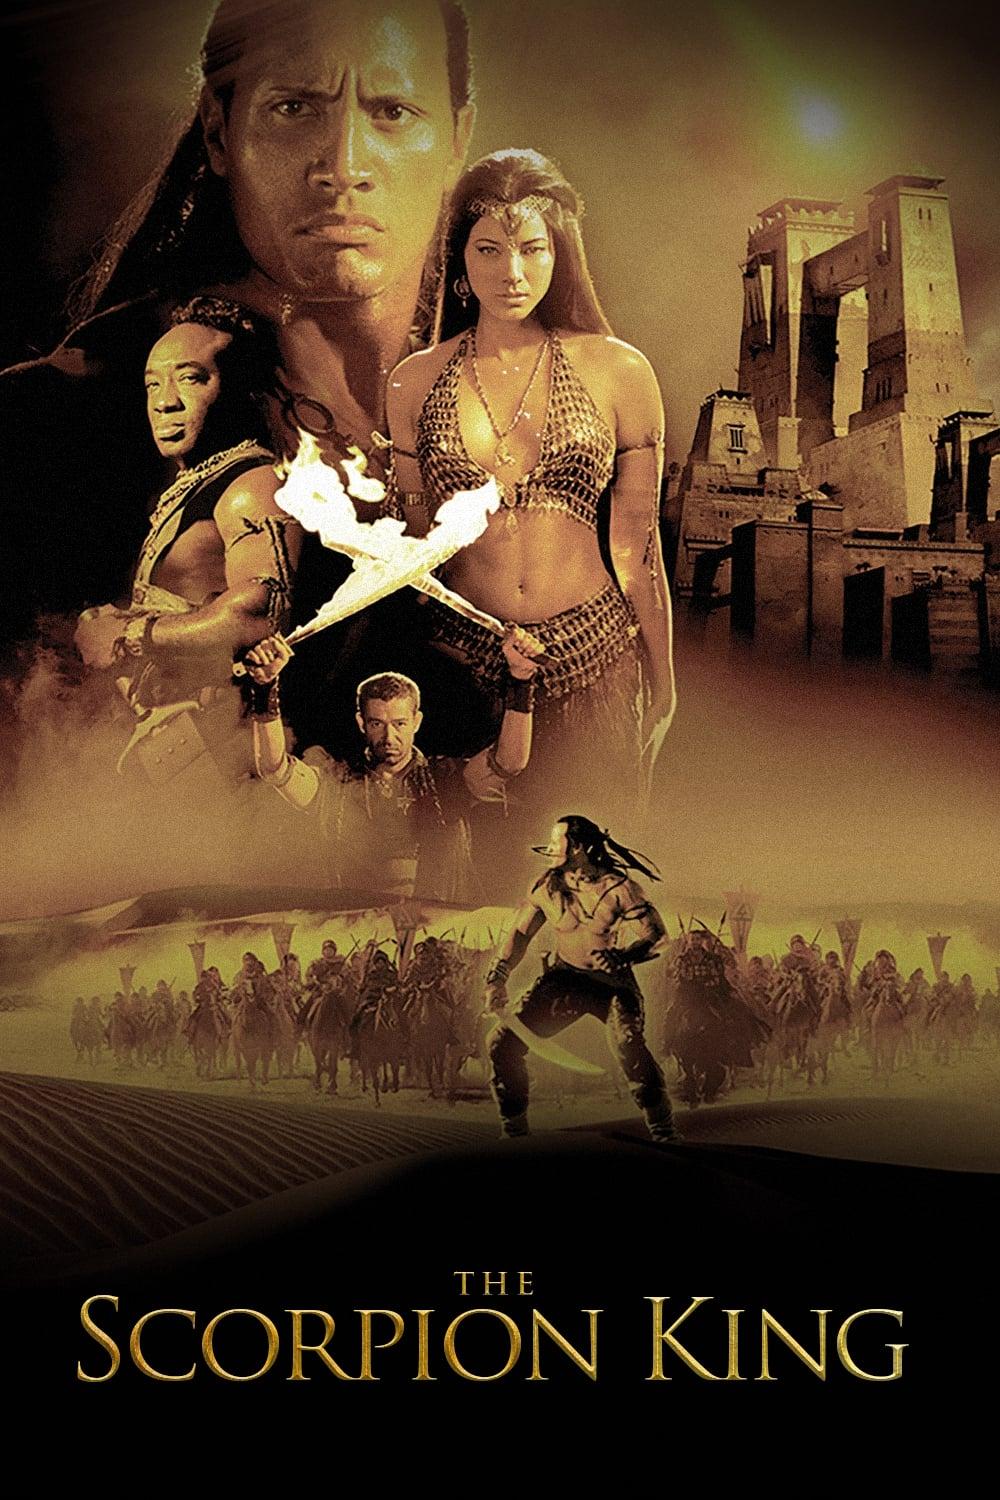 The Scorpion King poster